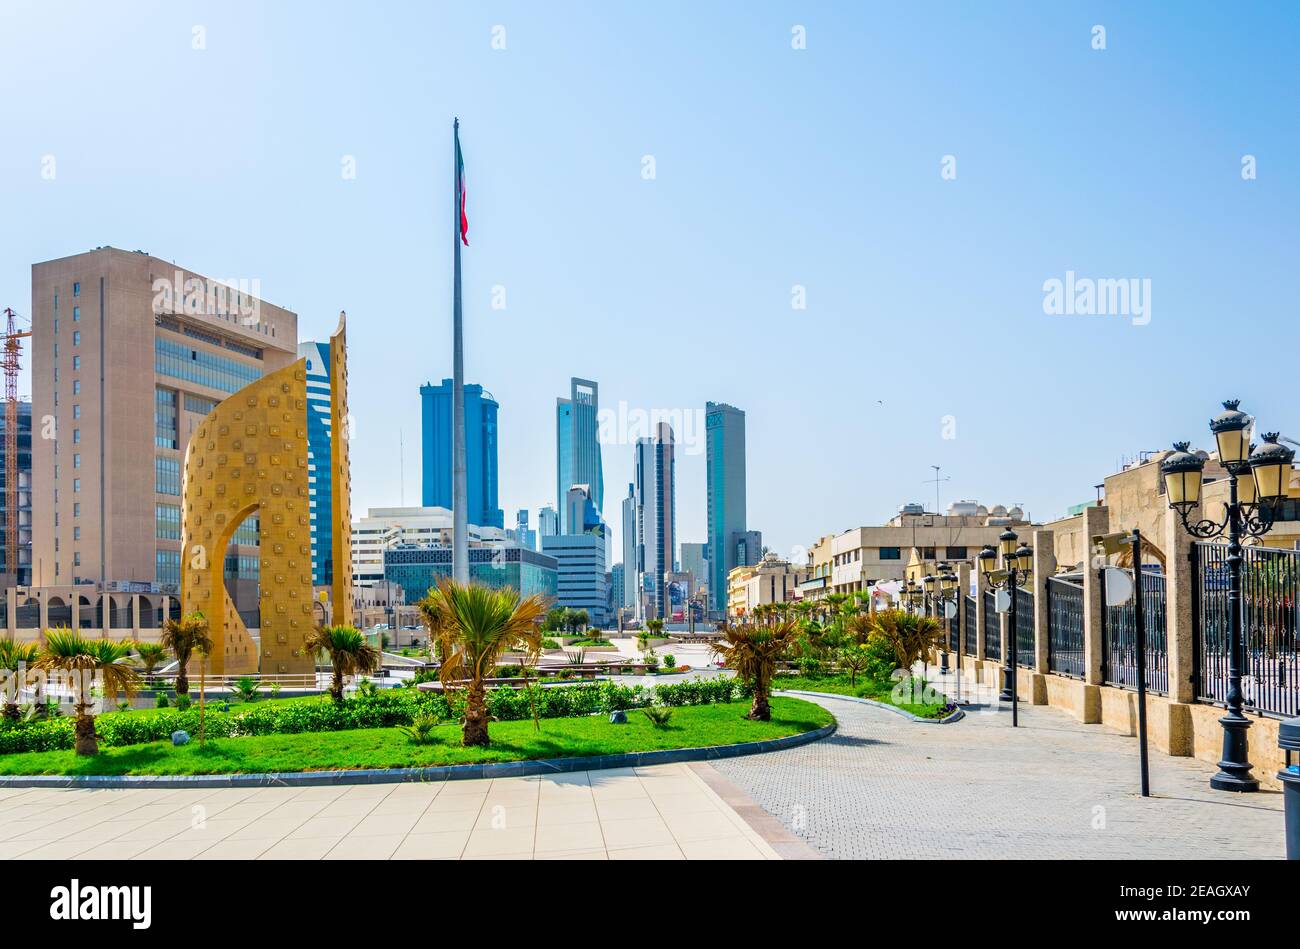 View of a a golden monument with a small park in the central Kuwait. Stock Photo